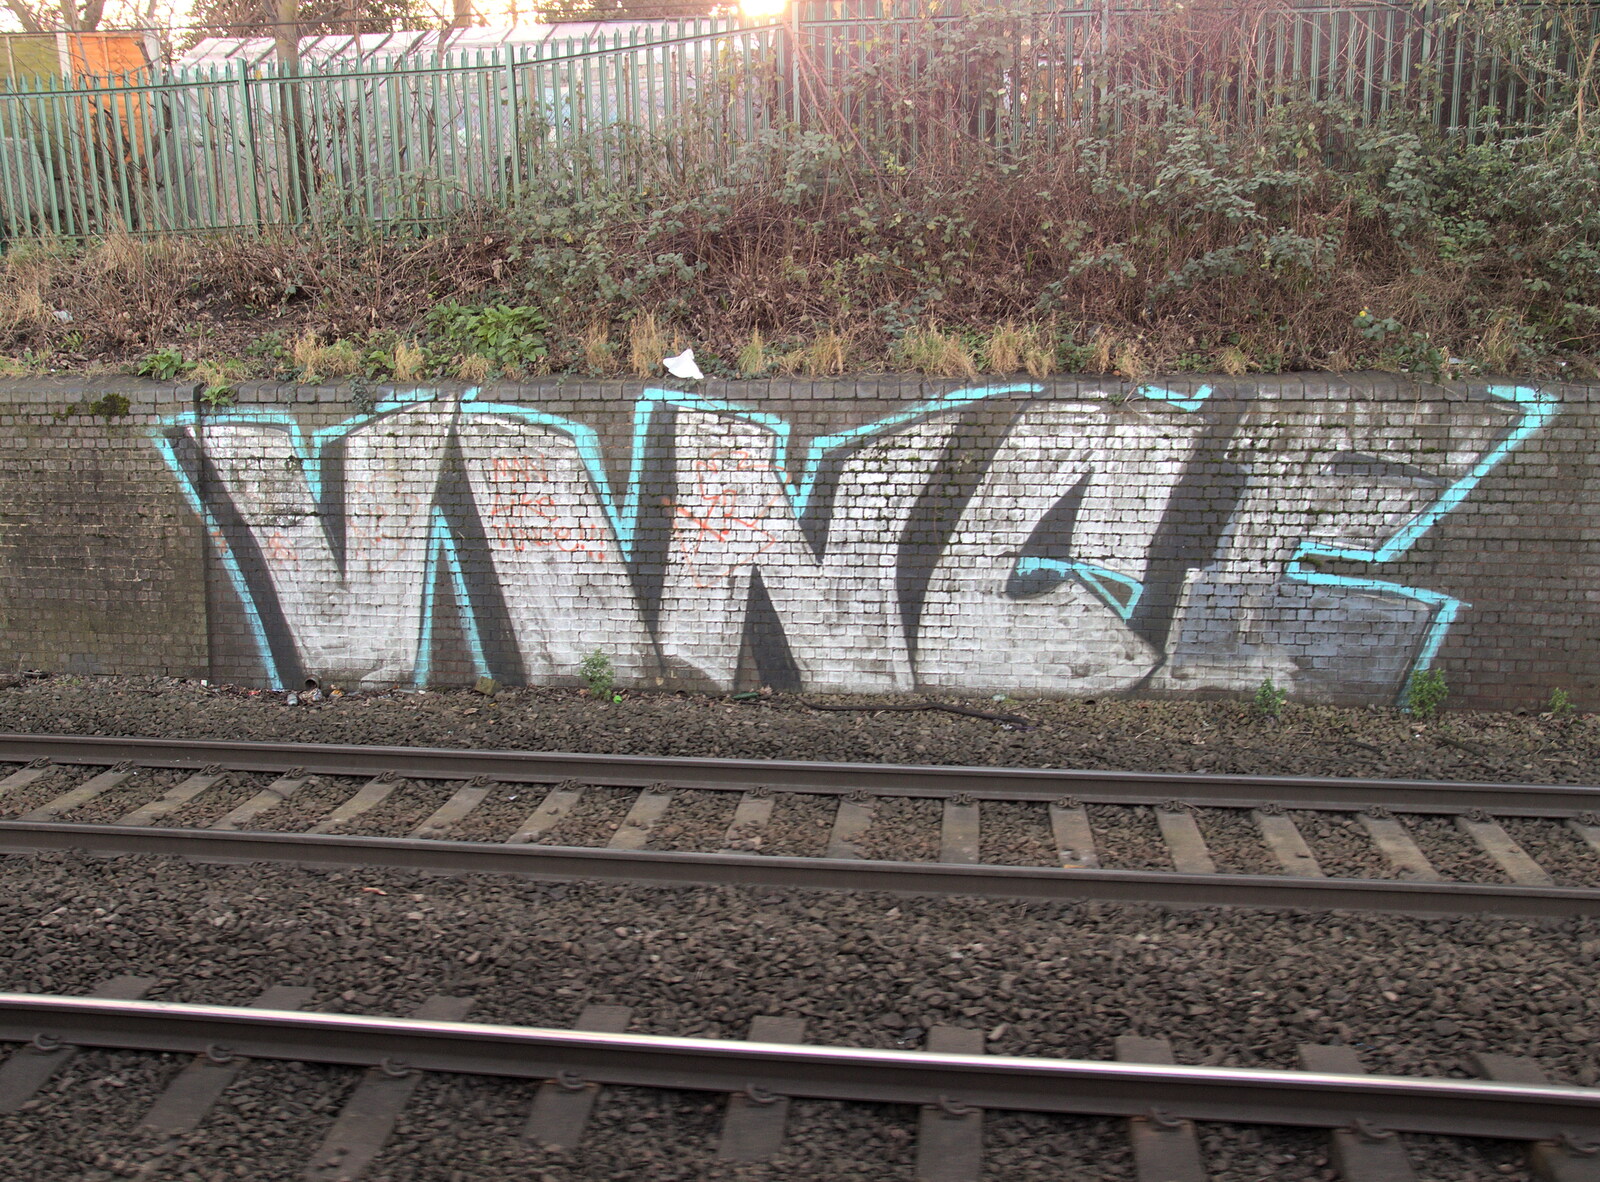 Old Vince graffiti by the trackside from Ten-Pin Bowling, Riverside, Norwich - 3rd January 2016